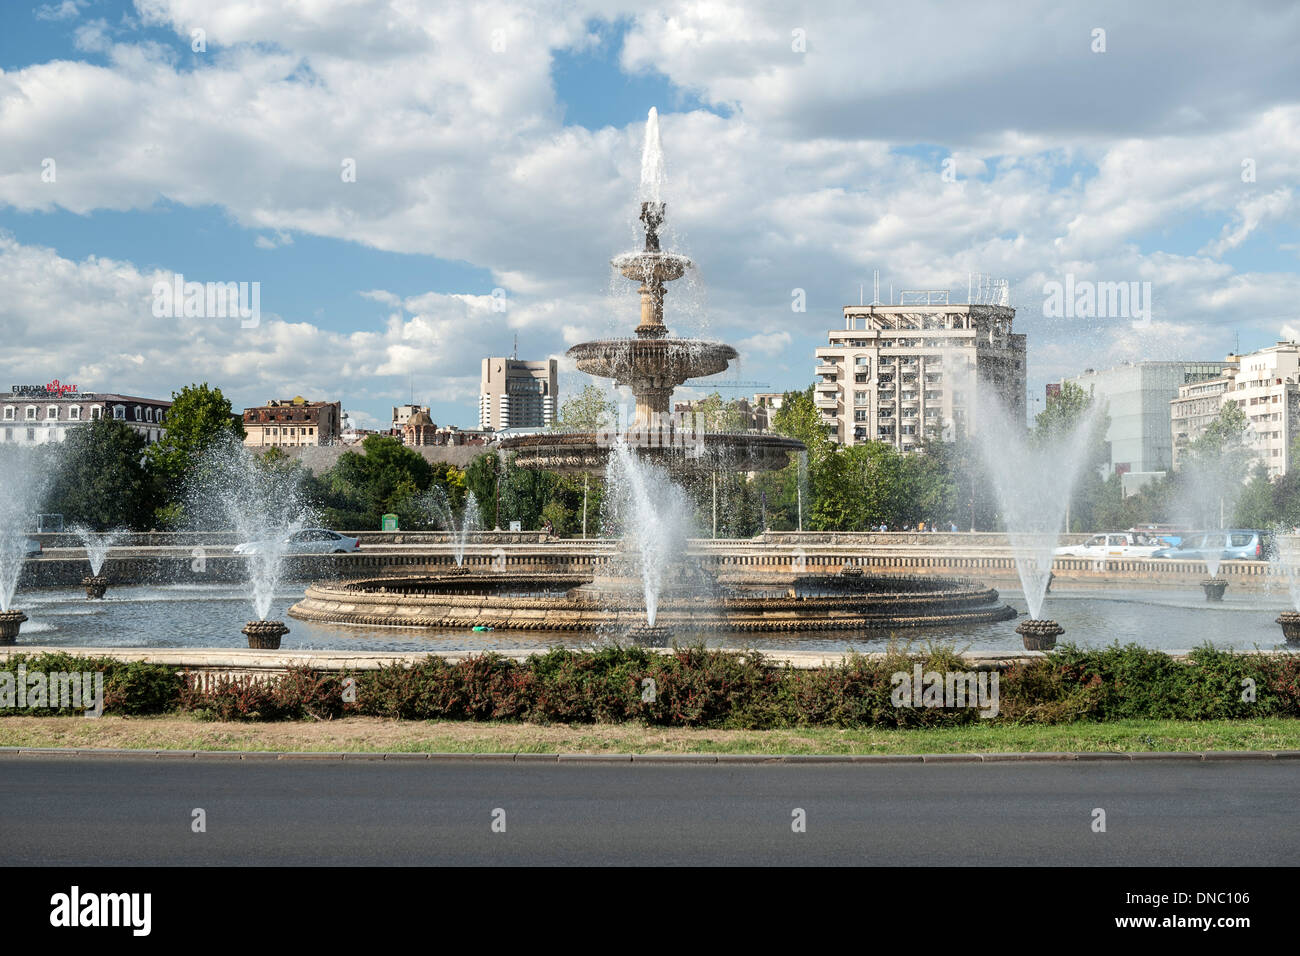 The fountains of Piața Unirii (Unification Square) in Bucharest, the capital of Romania. Stock Photo